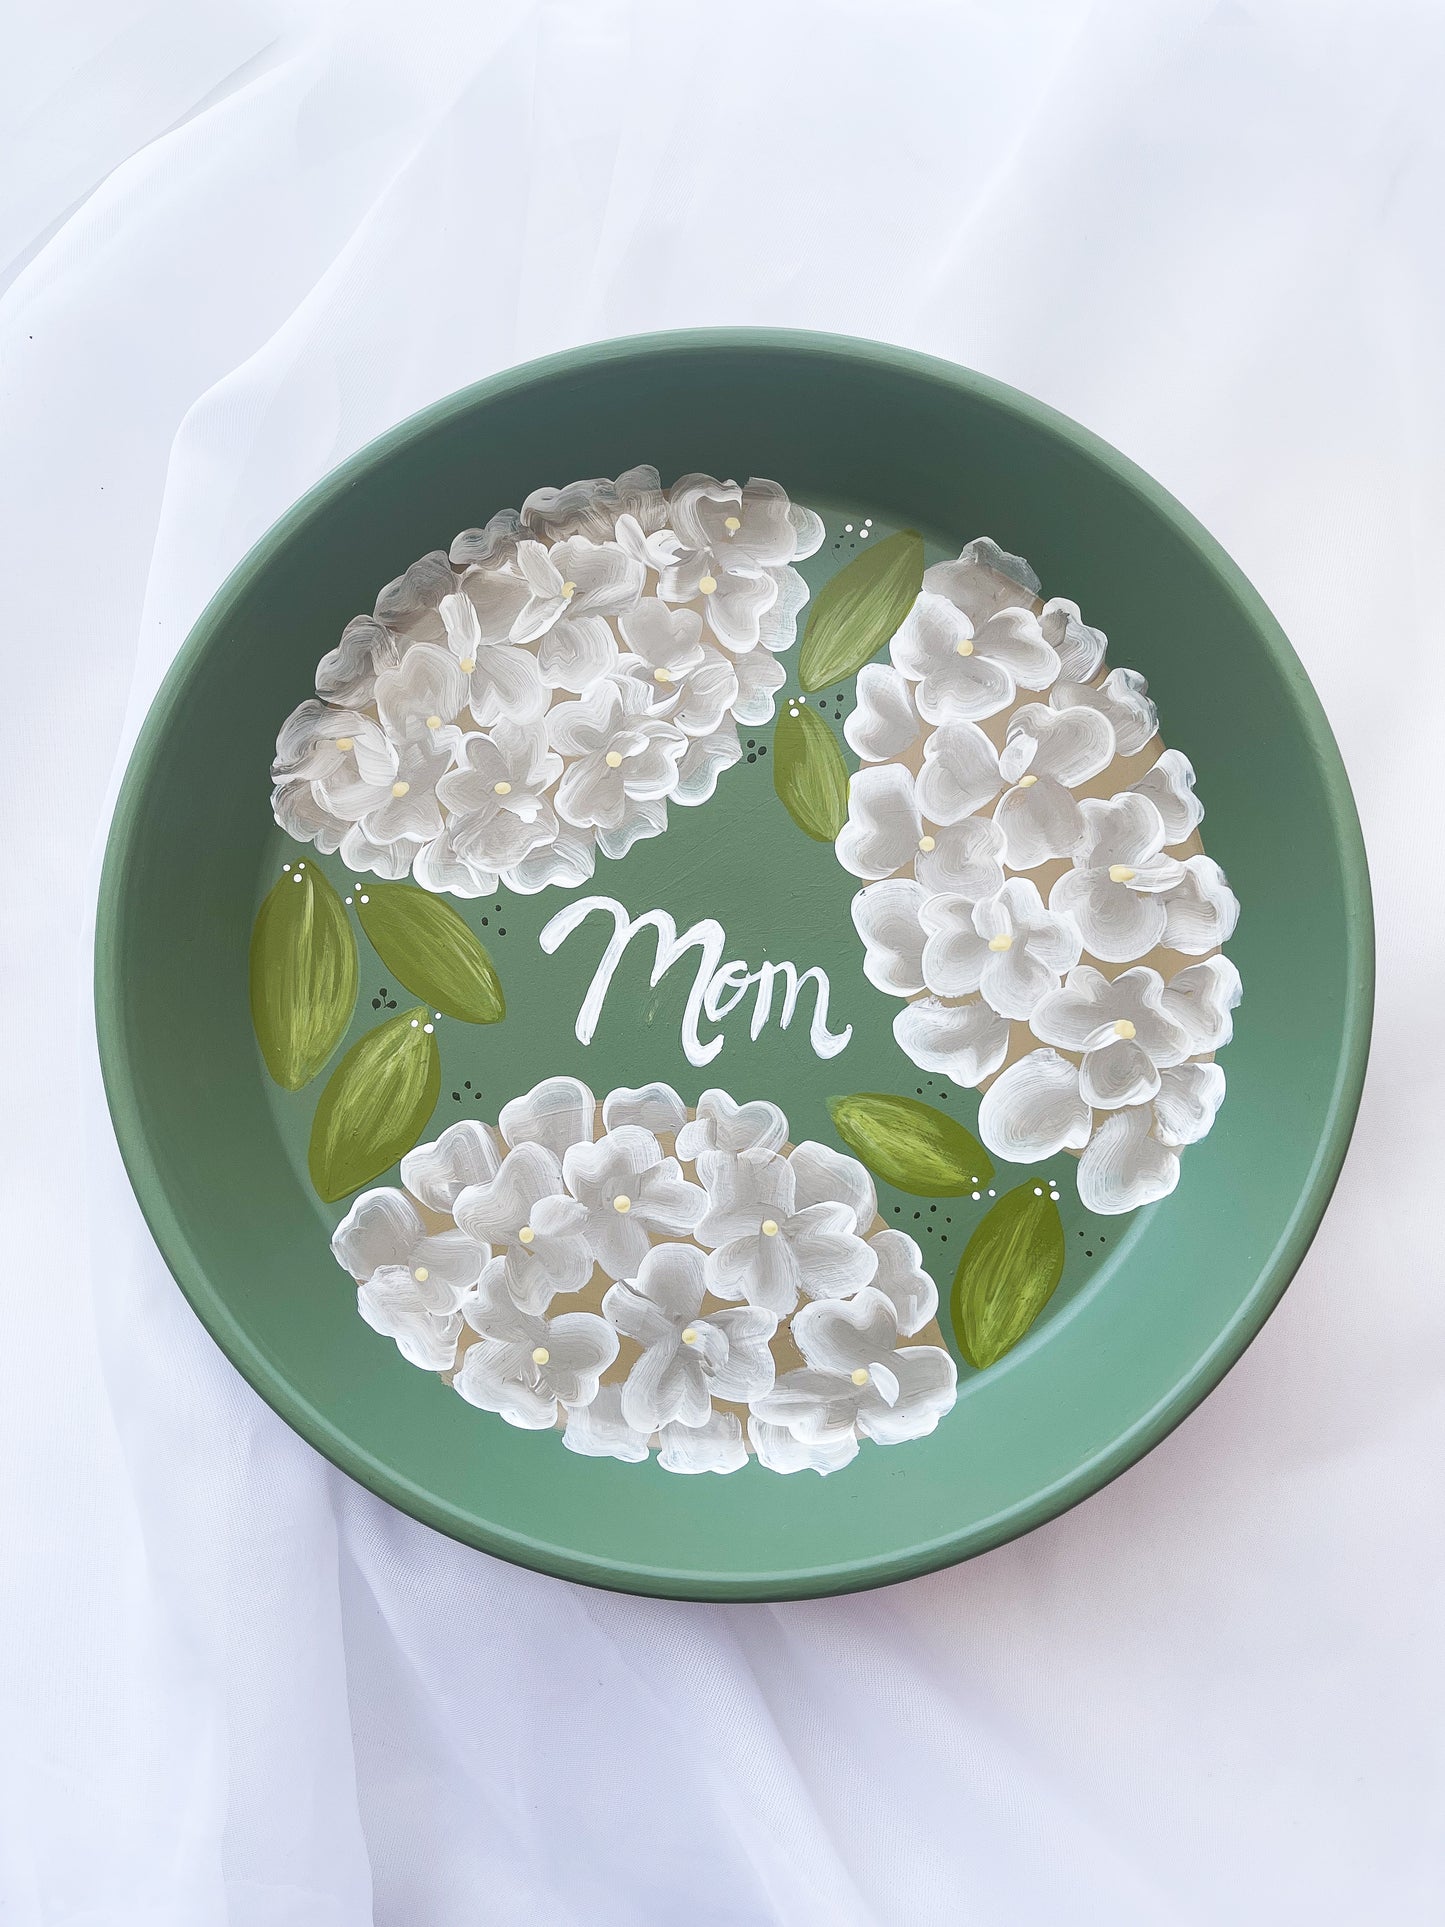 Hydrangea "Mom" Saucer Tray for Jewelries and Accessories| Mother's Day Gift | Hand Painted Saucer | Ready to Ship